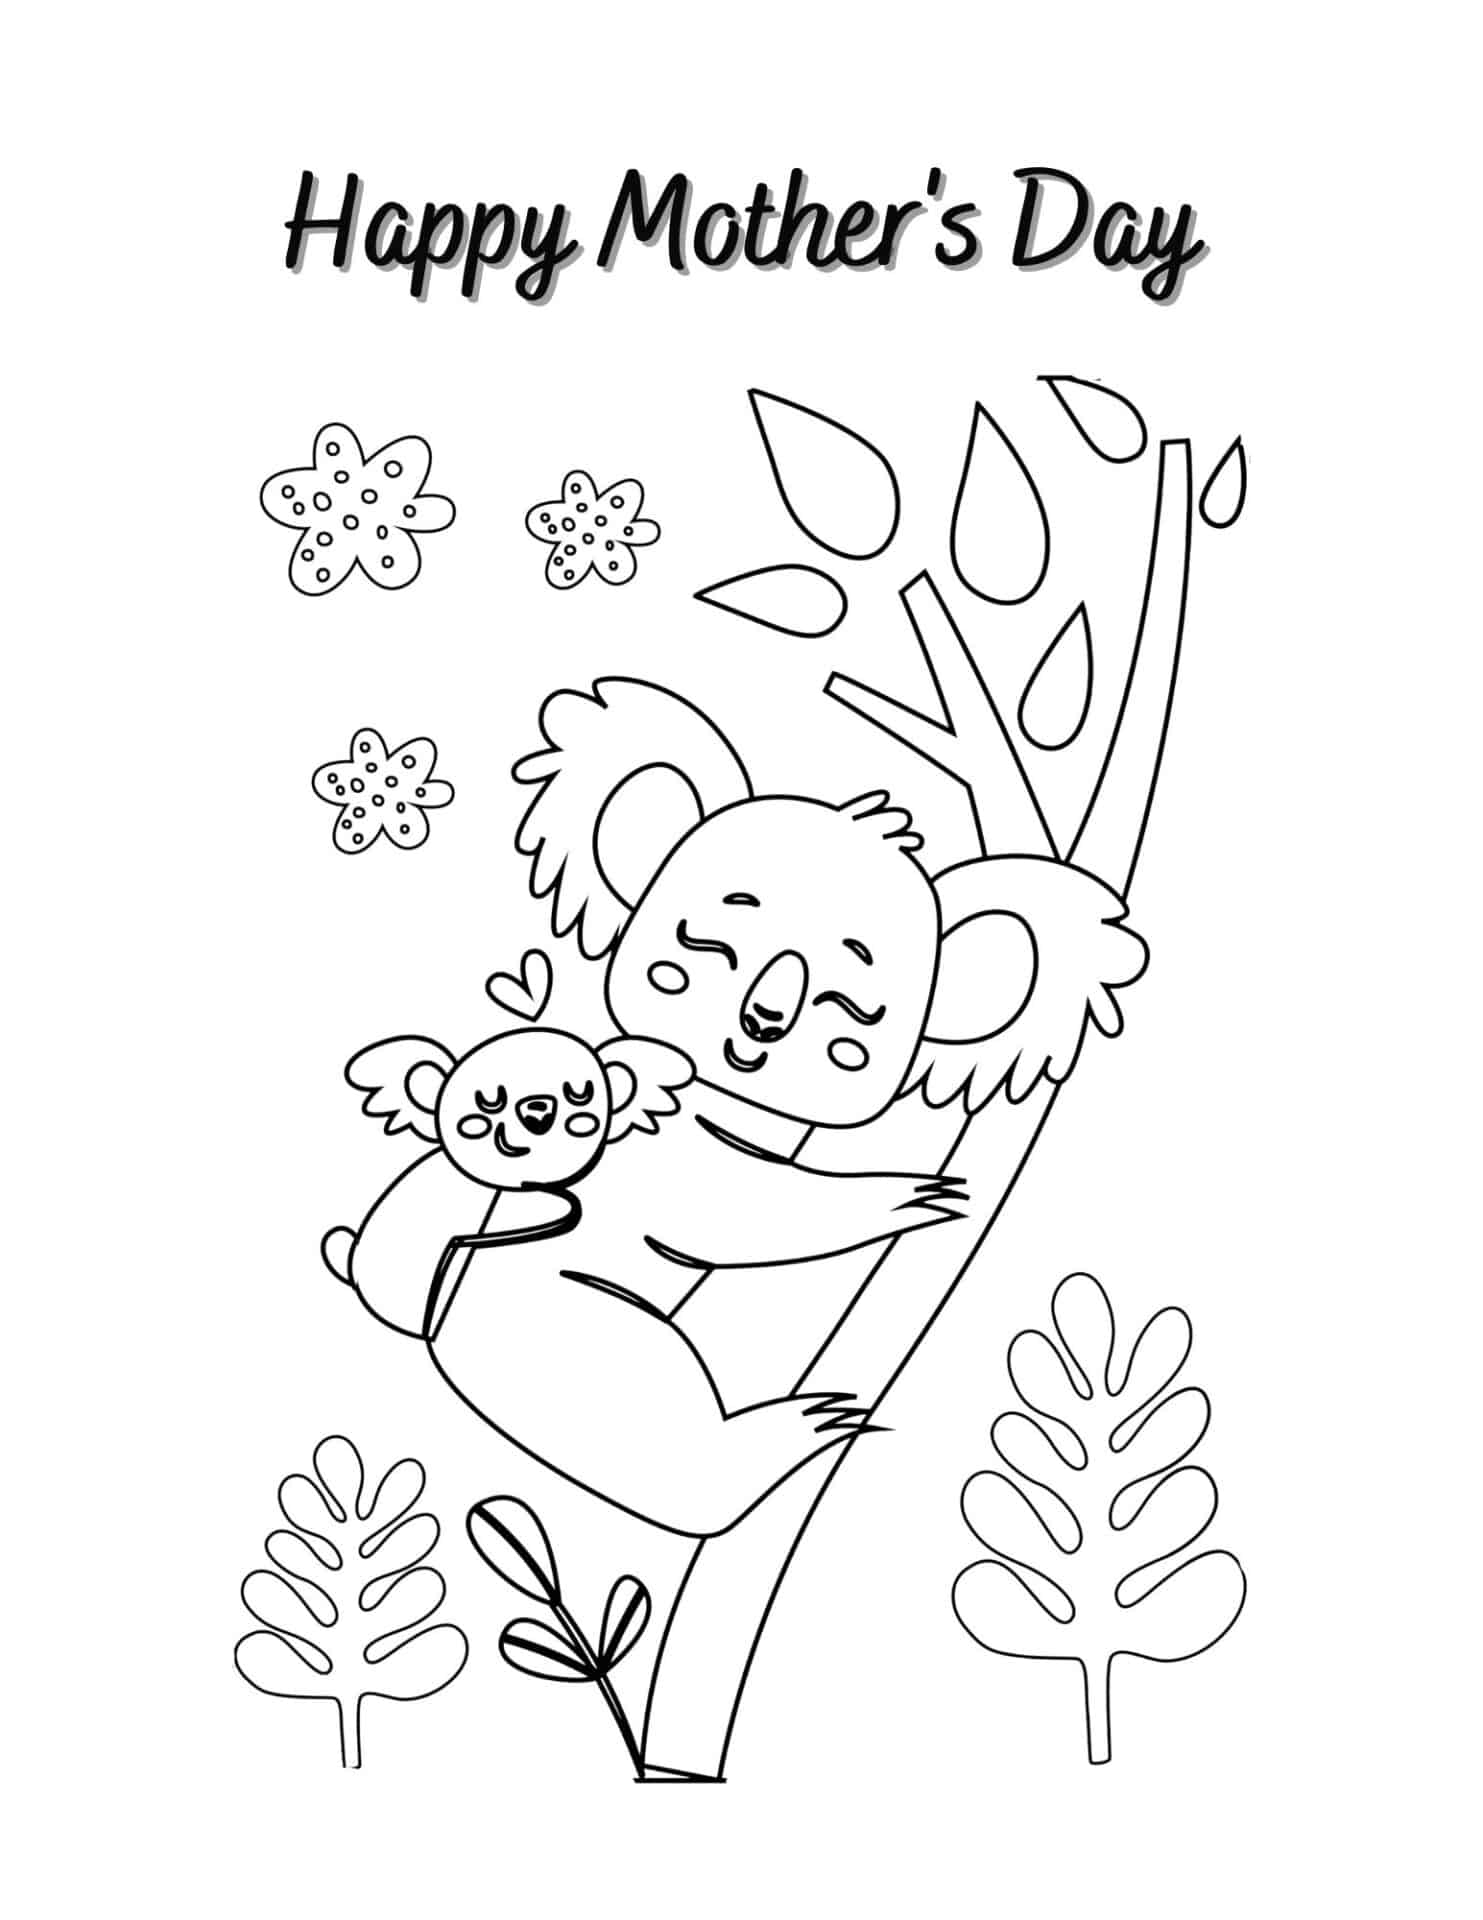 6 Mother's Day Coloring Pages | Free | Printable